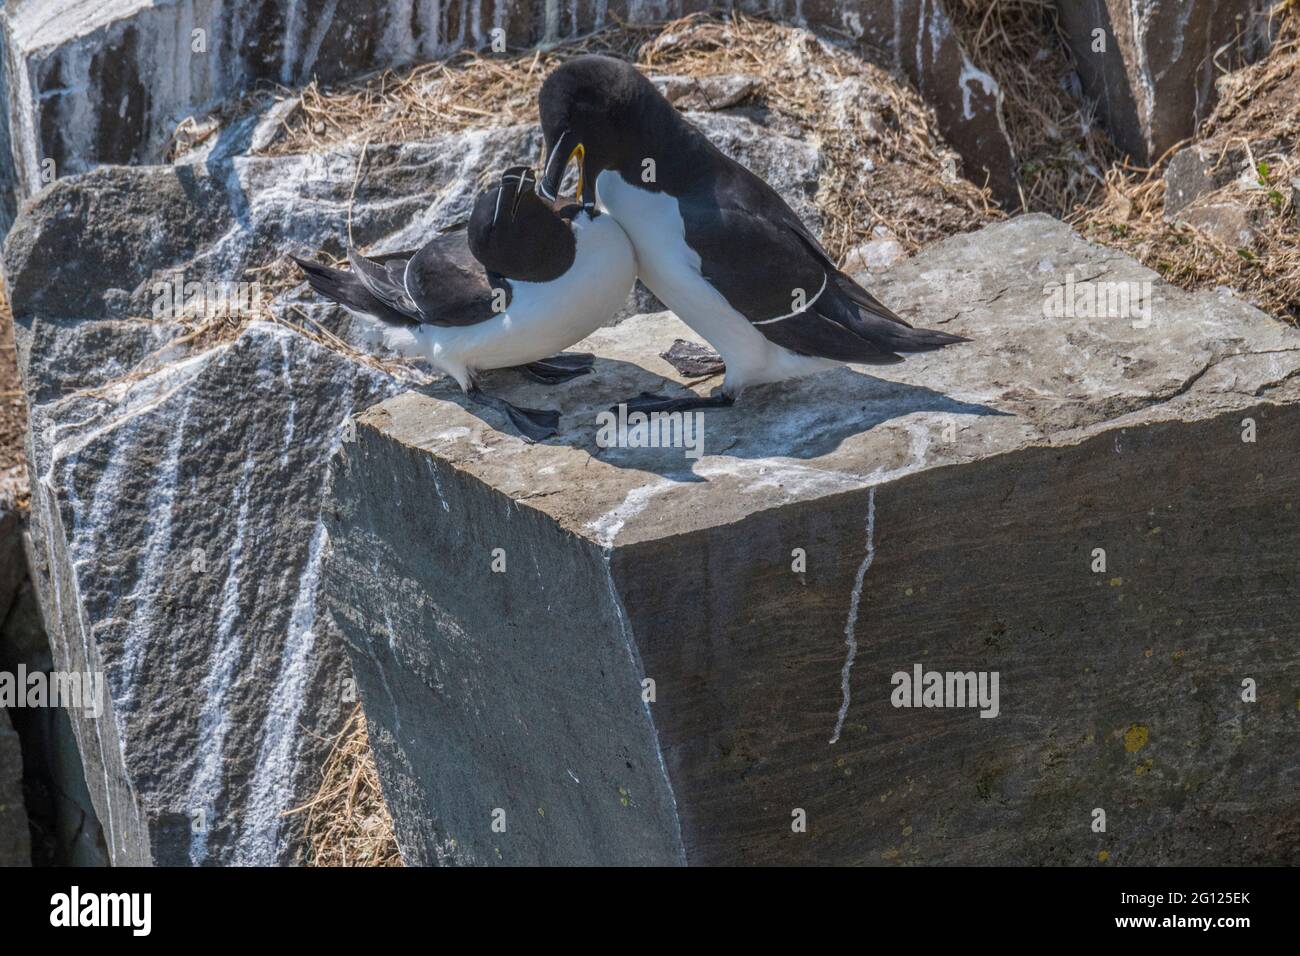 Razorbill auk pair engaged in courtship display., Cape St. Maryt's Ecological Reserve, Newfoundland, Canada Stock Photo